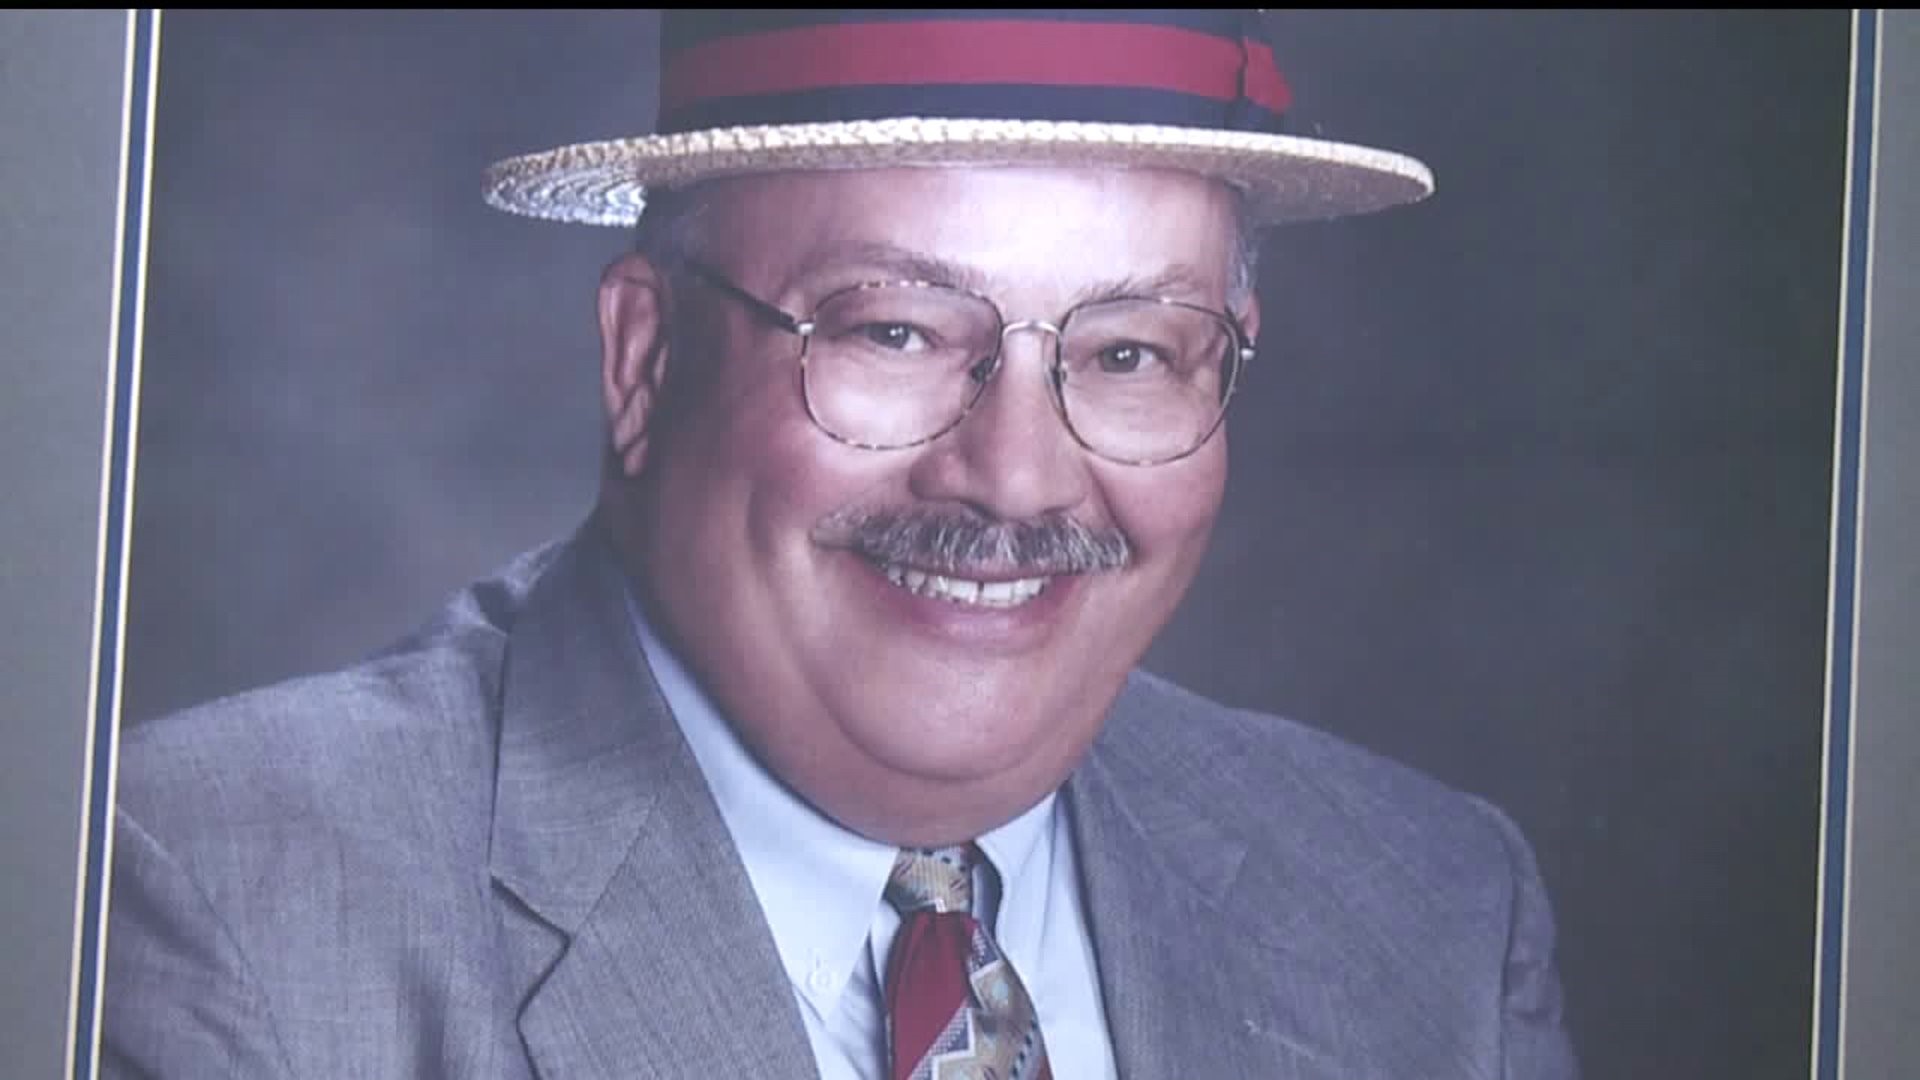 Quad Cities community honors the life and death of 'Happy Joe' Whitty at Saturday events